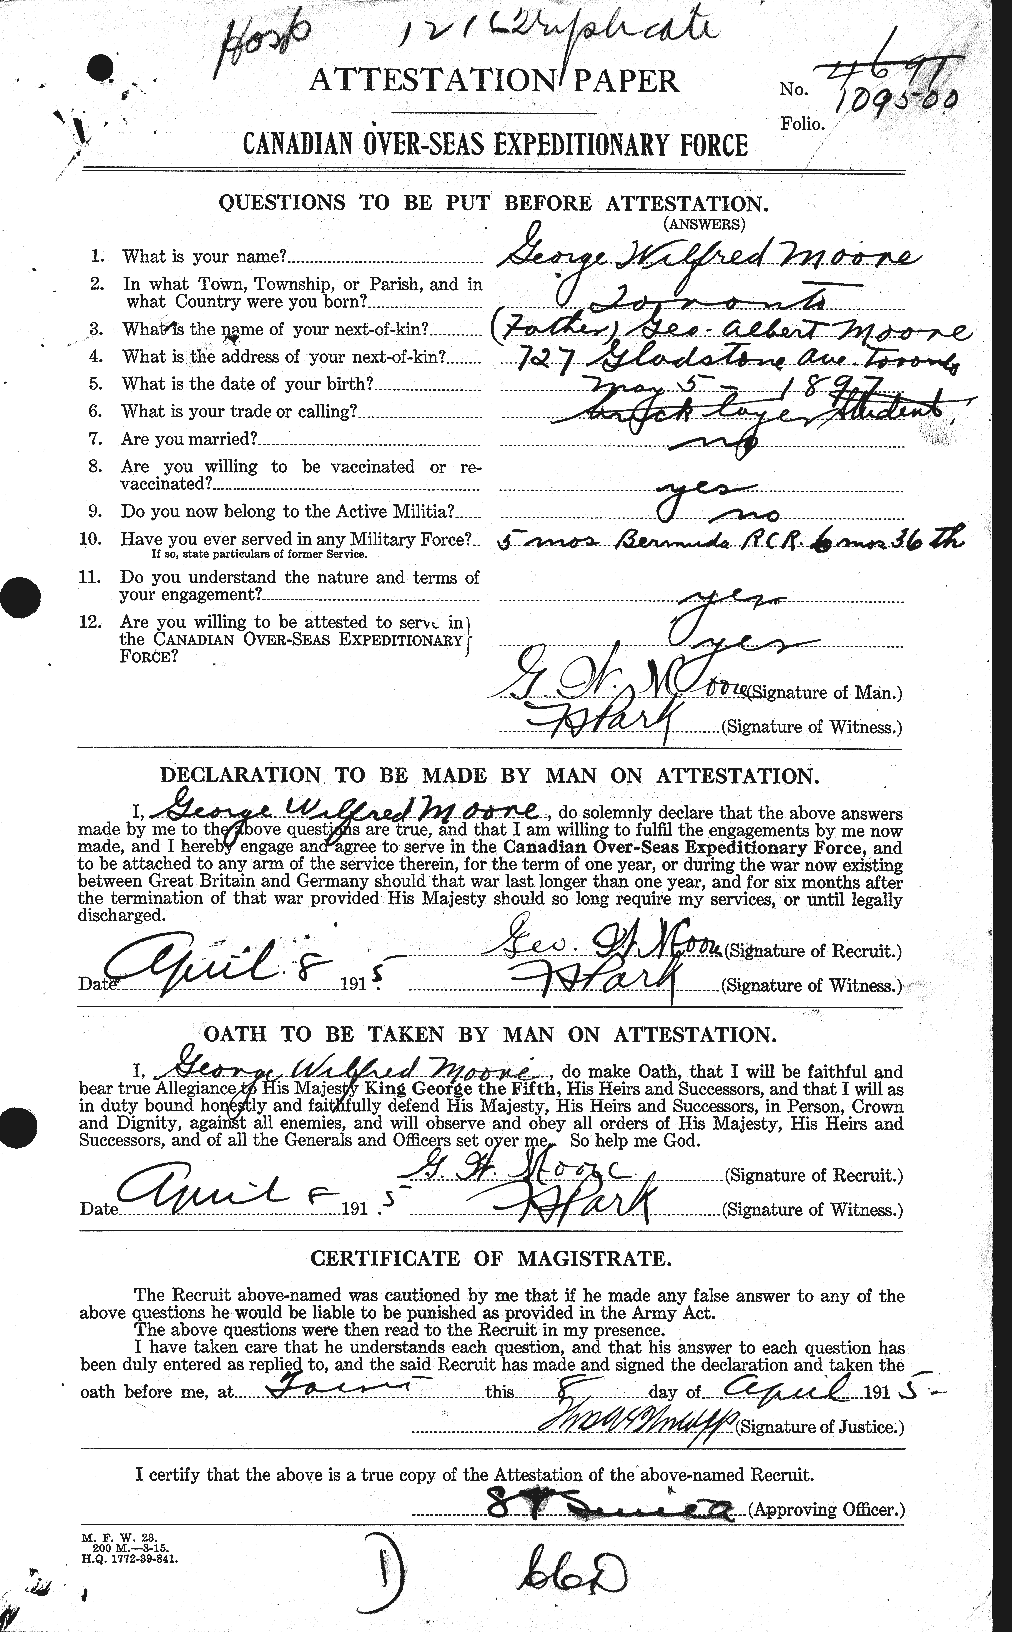 Personnel Records of the First World War - CEF 502028a